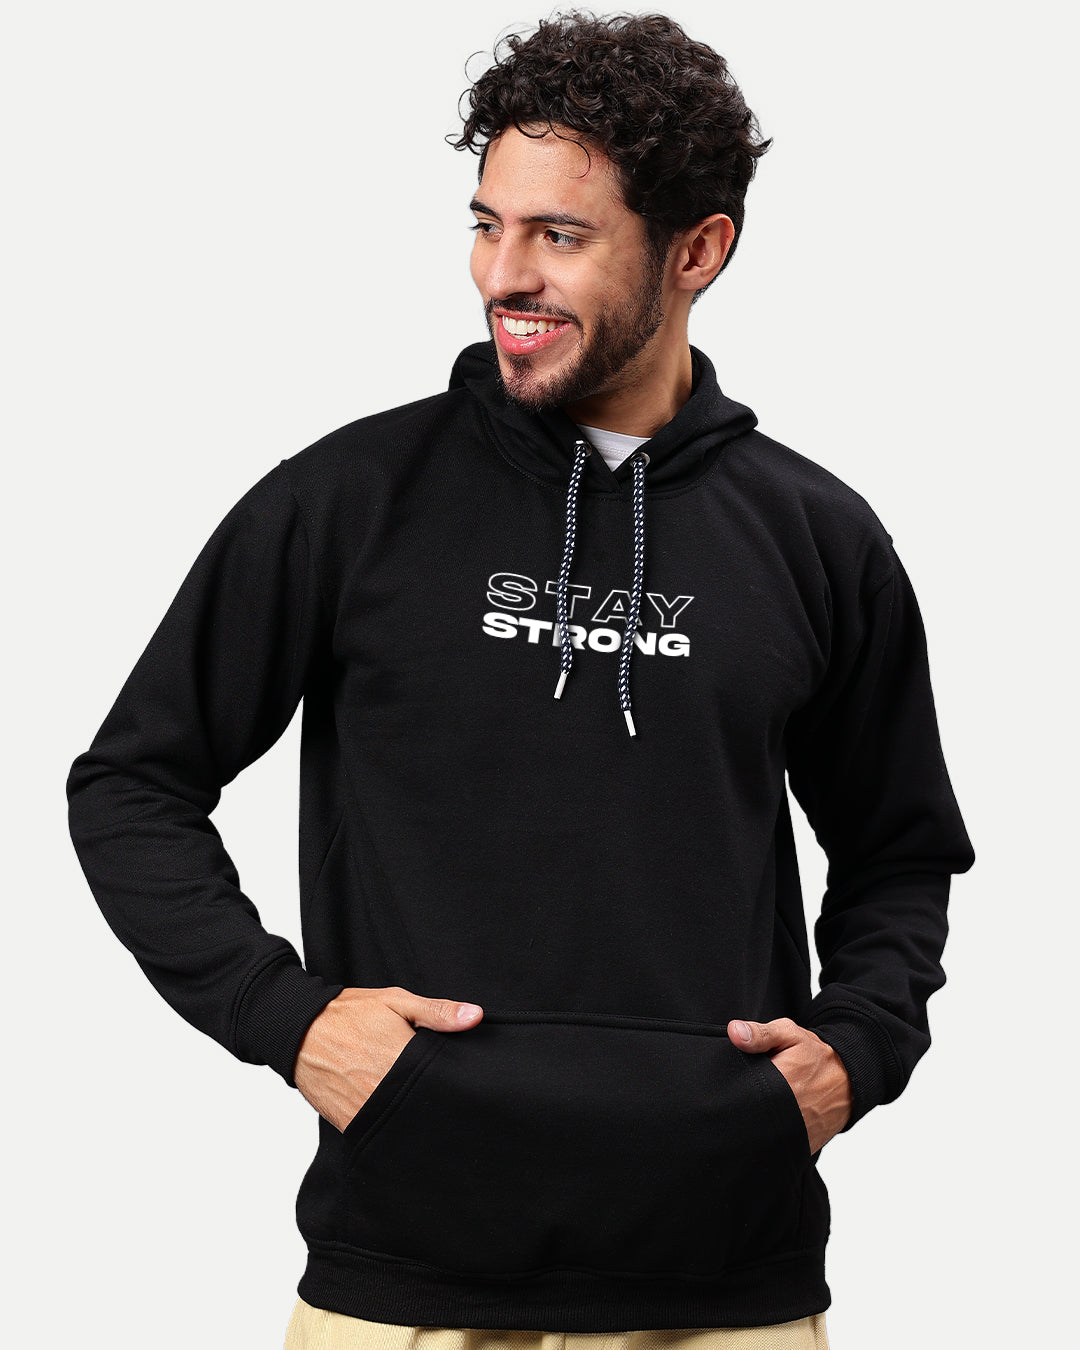 Stay Strong Men's Hoodie